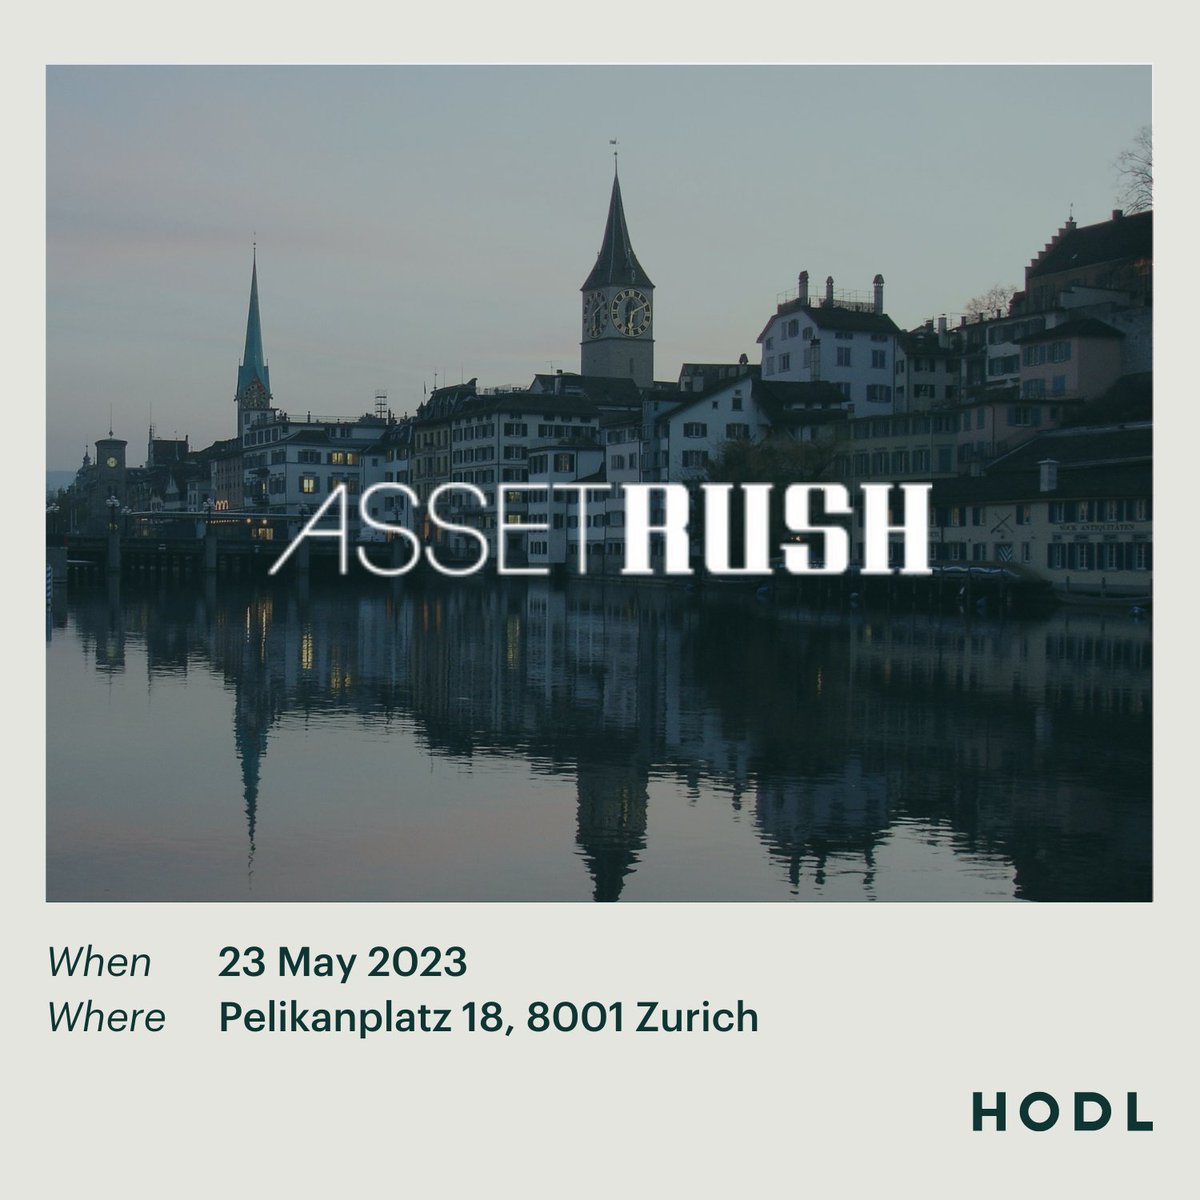 Tomorrow, you can find us at AssetRush x Zurich VII. #AssetRush and @RealVision unite qualified and institutional investors with today's pioneers of the financial world. Are you attending? Let's connect at #AssetRushxZurich!

#Innovation #Futureoffinance #Zurich